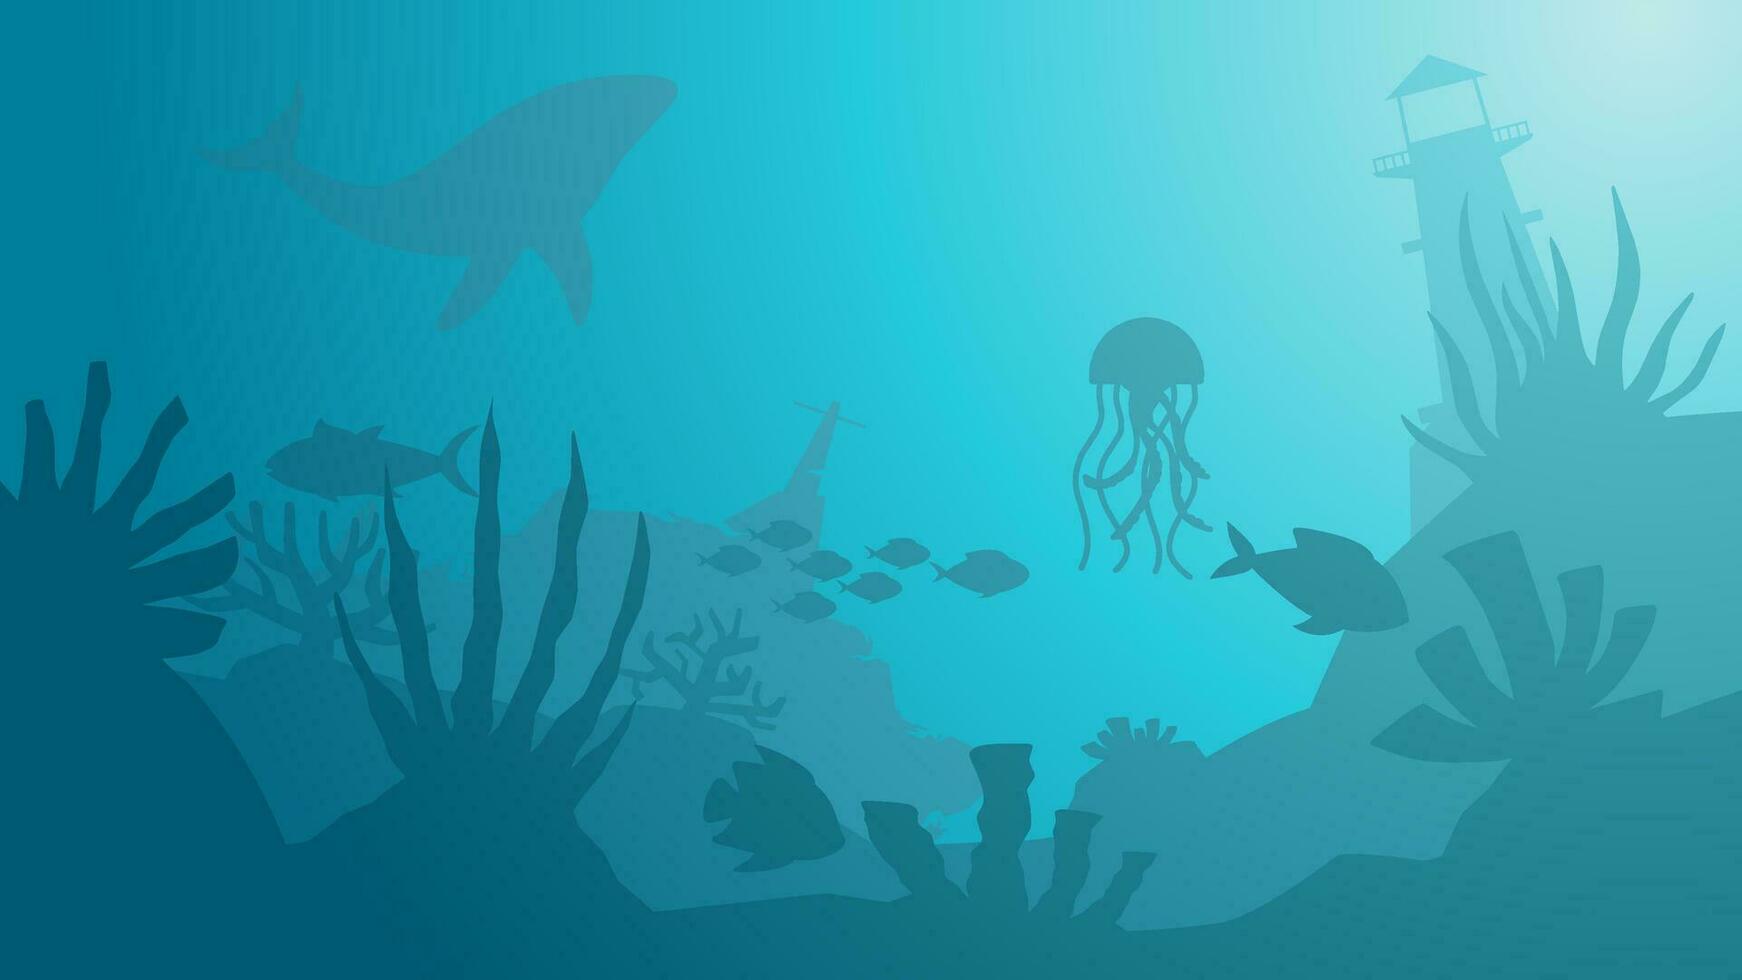 Seascape vector illustration. Scenery of sunken lighthouse and shipwreck at the bottom of the sea. Sea world silhouette for background, wallpaper or illustration. Undersea coral reef and fish panorama